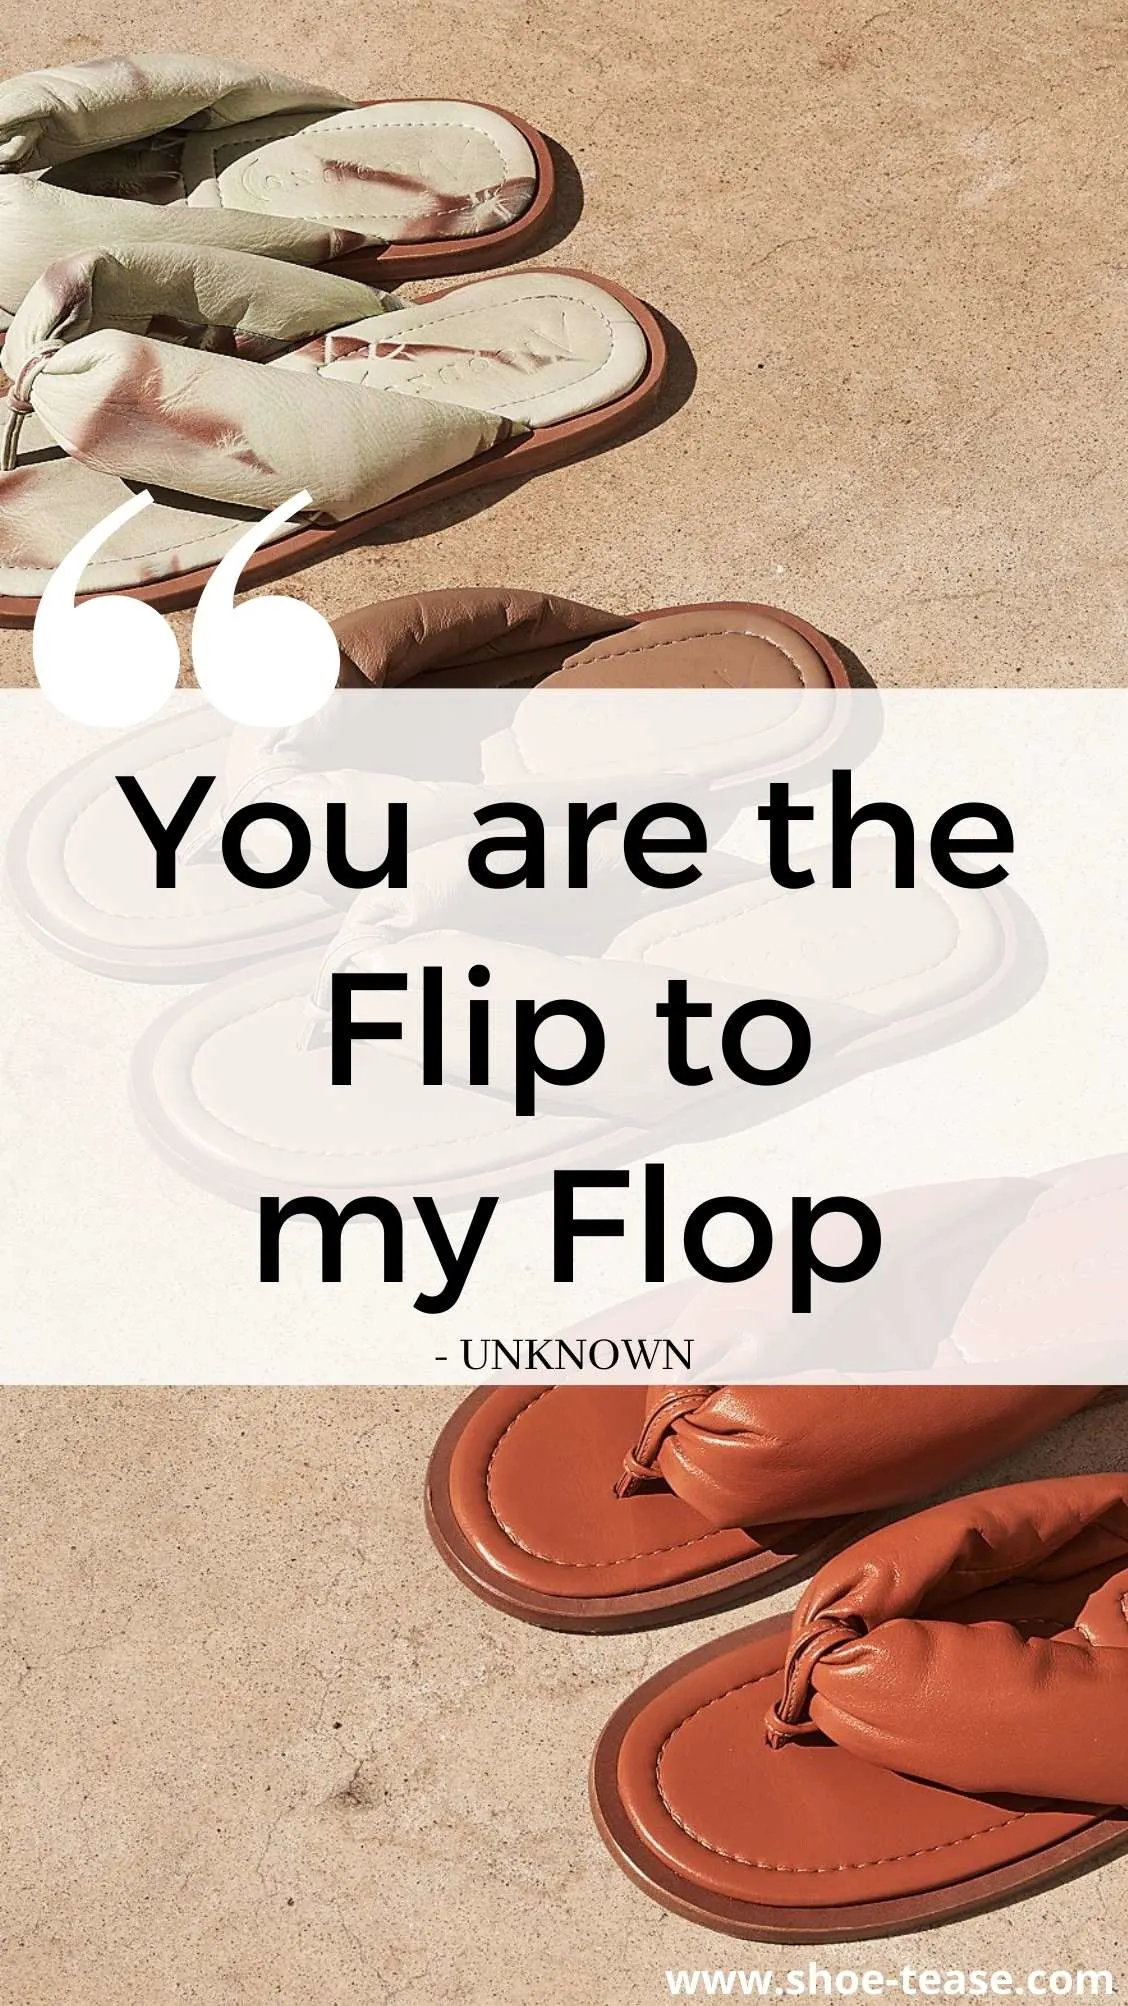 Flip flop quote reading you are the flip to my flop unknown over image of flip flops on sand.